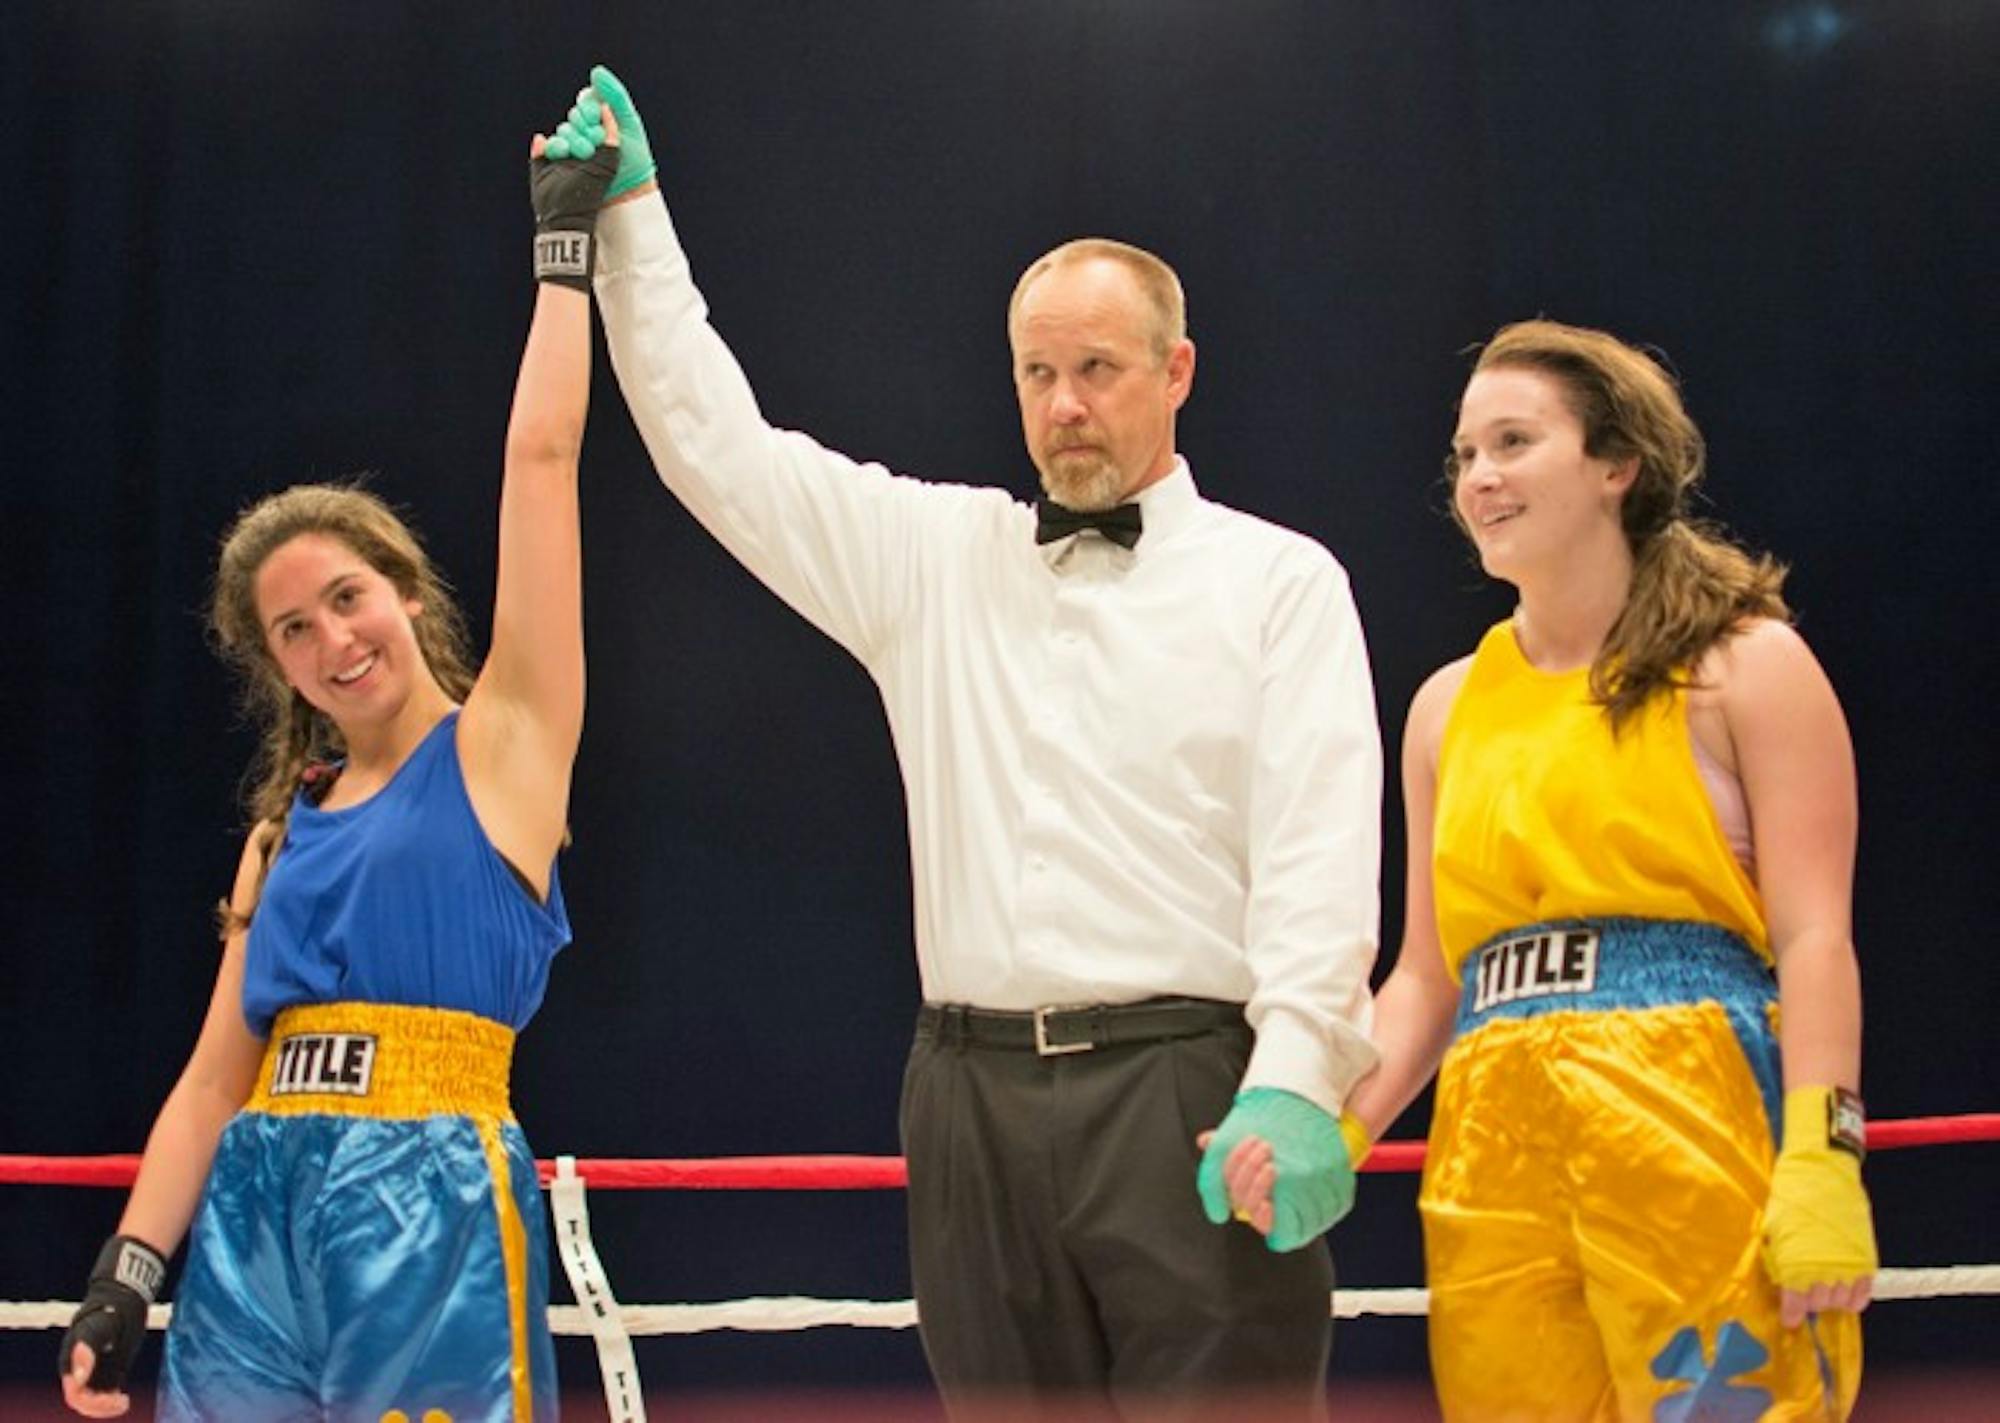 Senior Ava Stachelski, left, is declared the winner by unanimous decision after her semifinal bout with junior Caitlyn Beauchamp on Tuesday night at Joyce Center Fieldhouse.